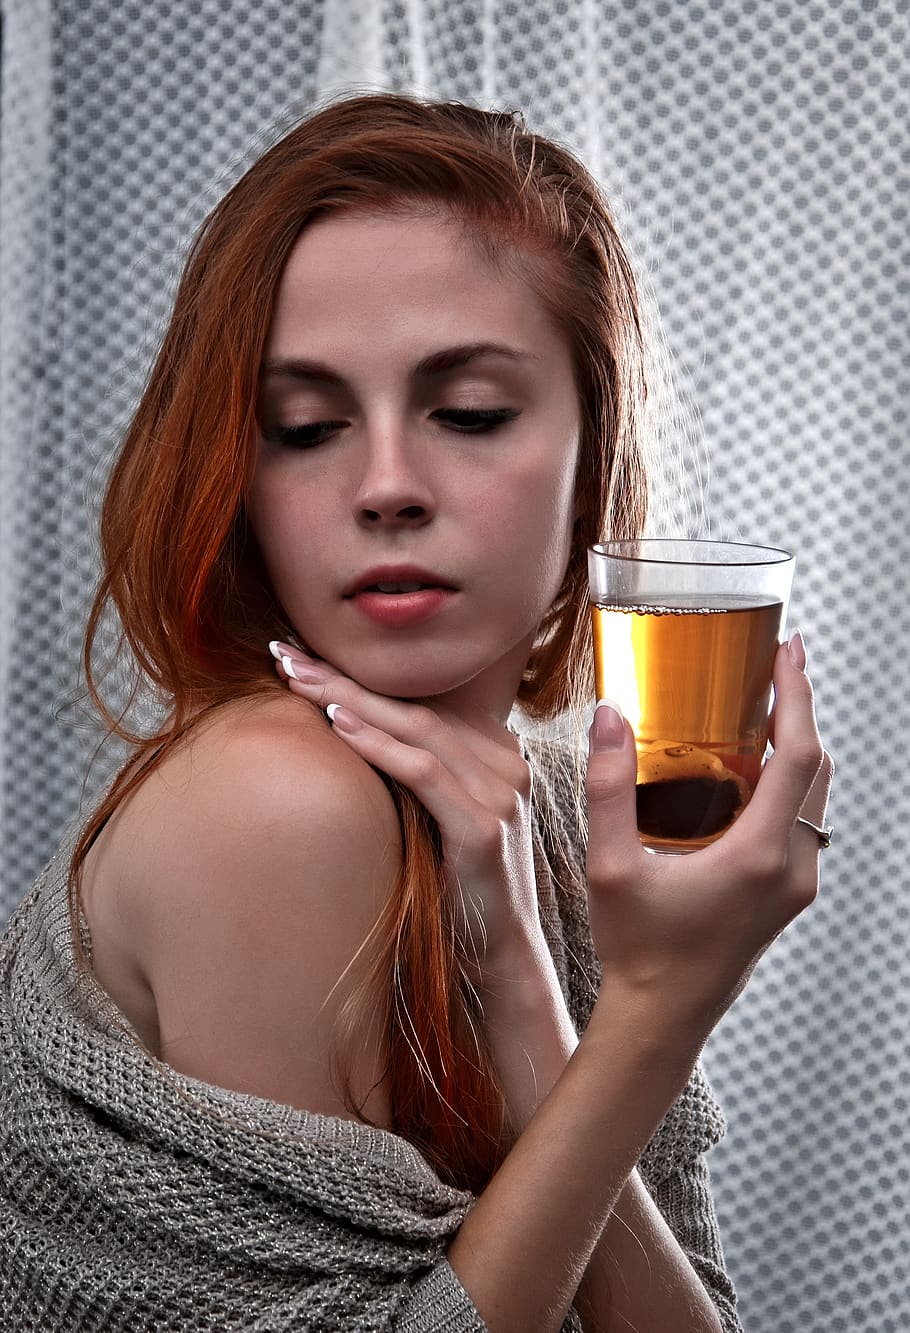 girl, tea, beauty, the awakening, the drink, morning, hands, woman, thinking, thoughtfulness